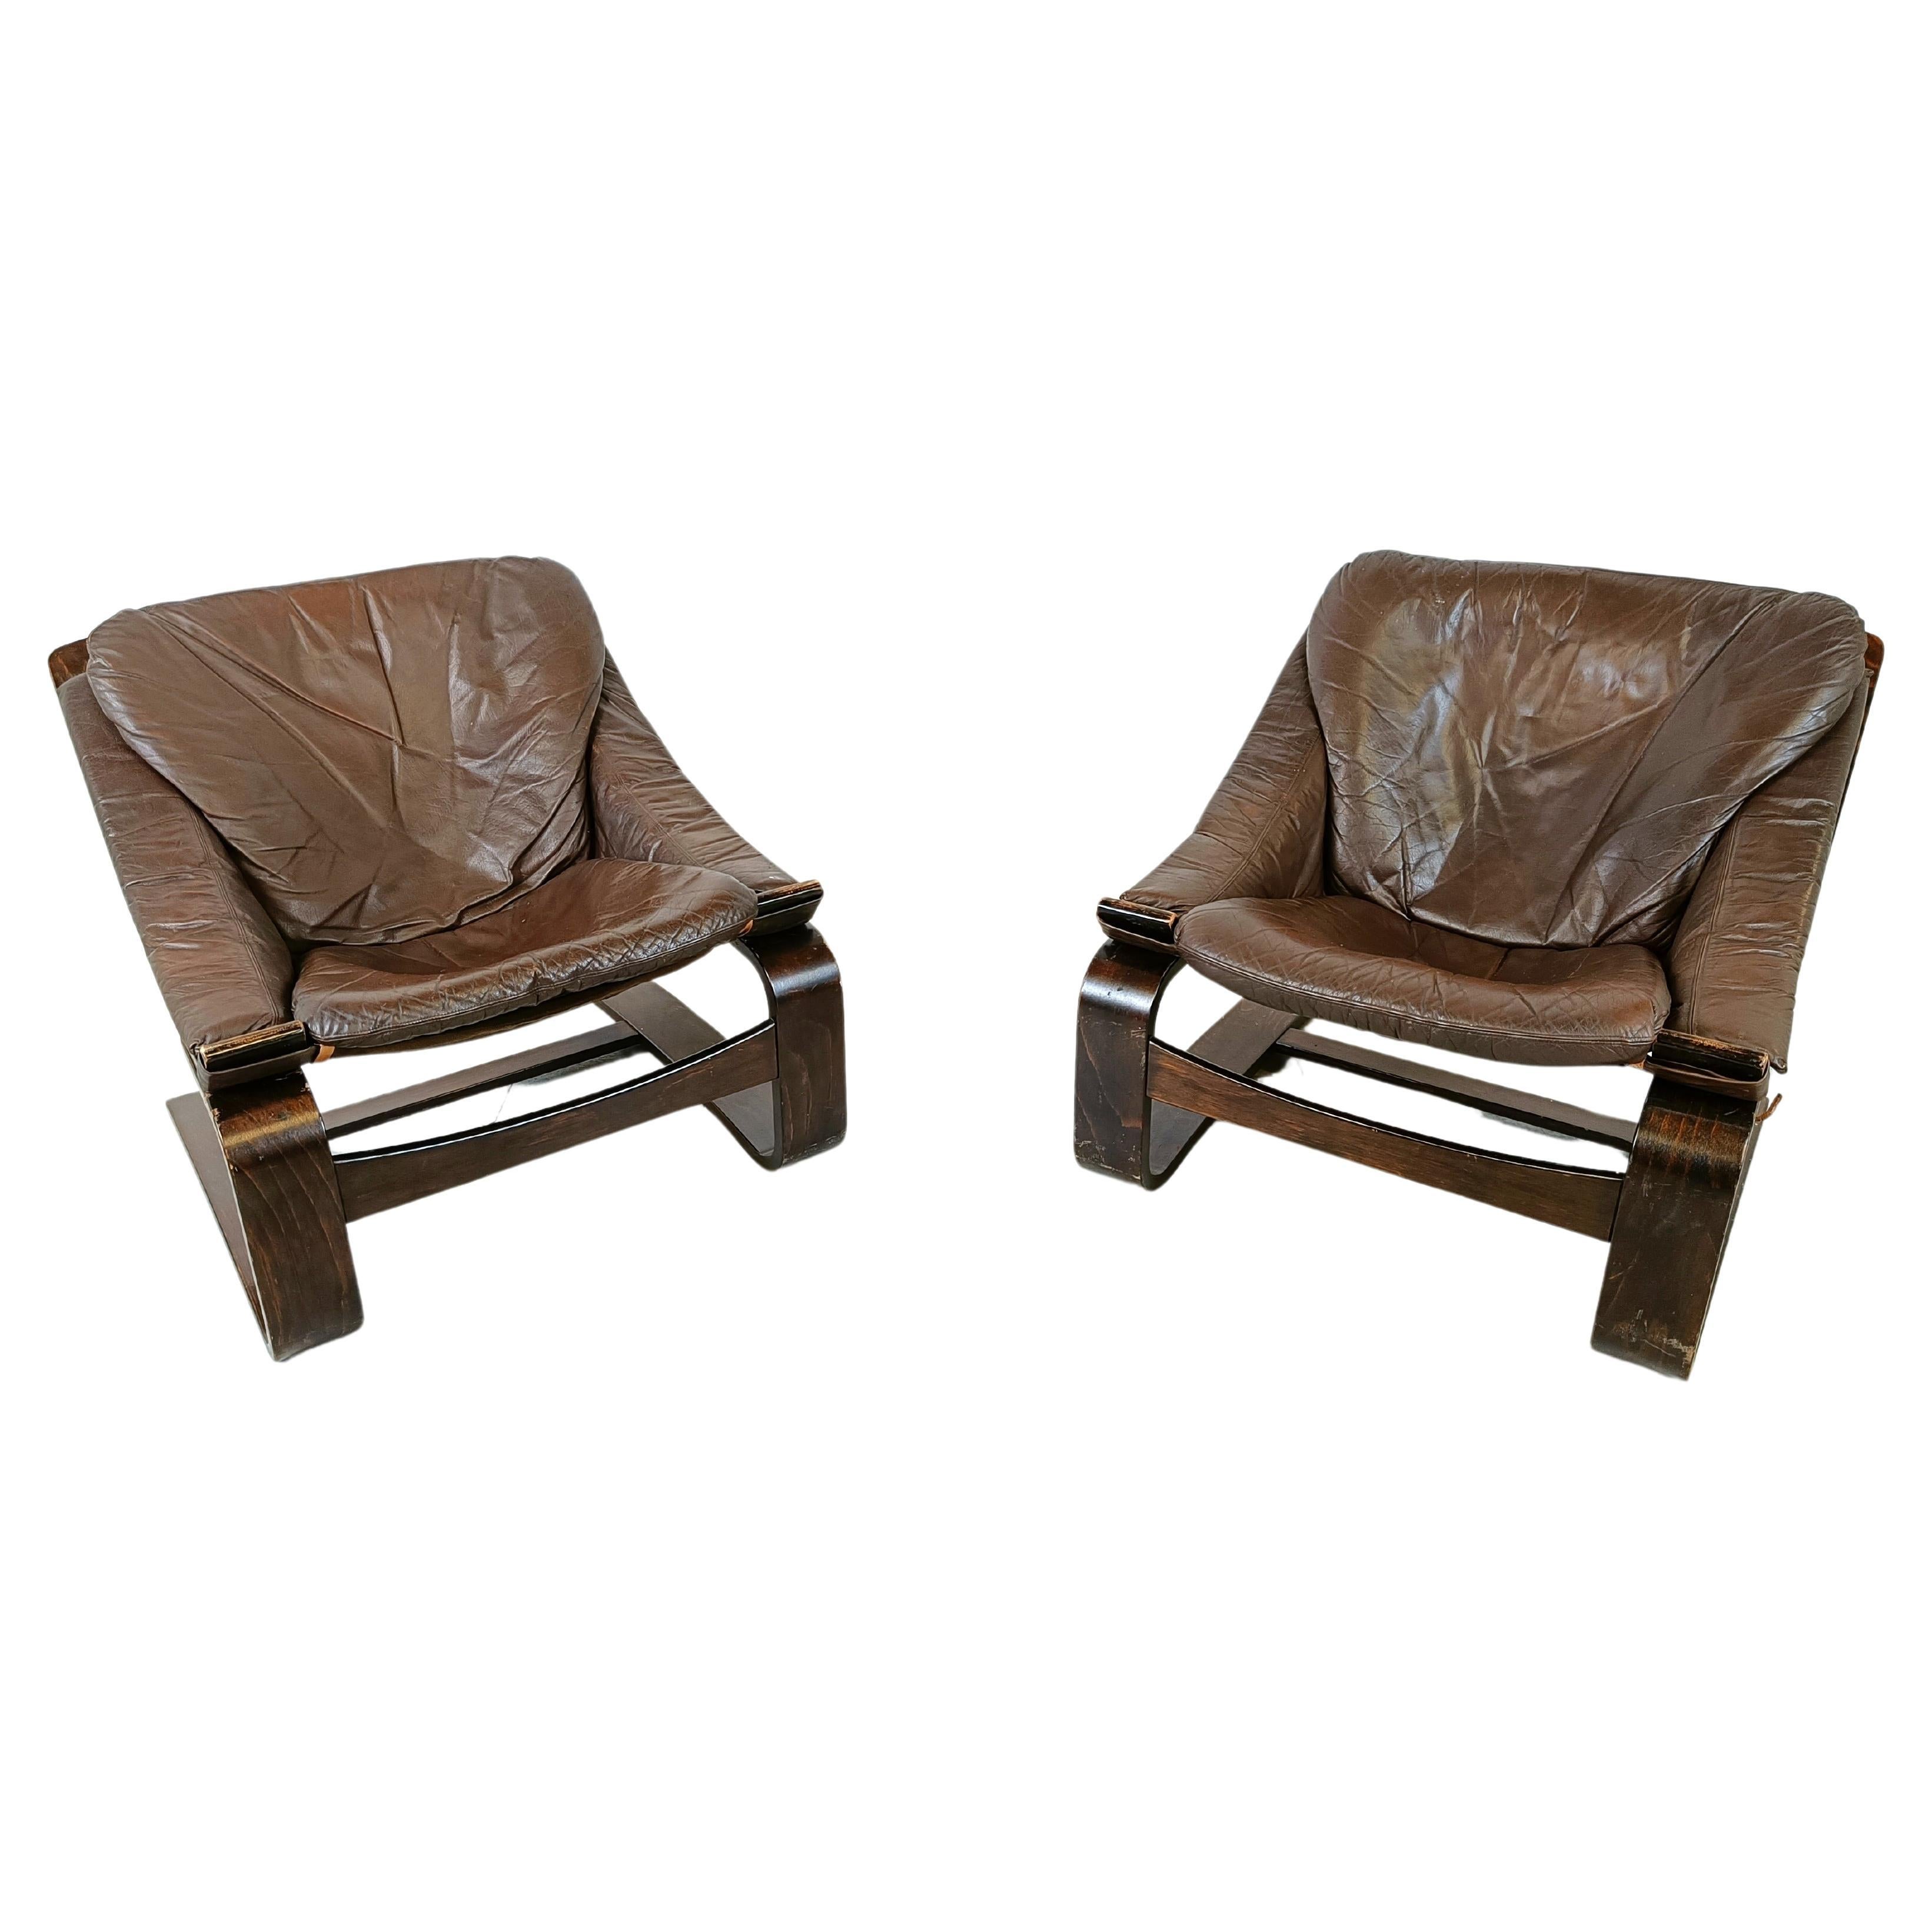 Swedish Kroken Armchairs by Ake Fribyter for Nelo Möbel, 1970s, set of 2 For Sale